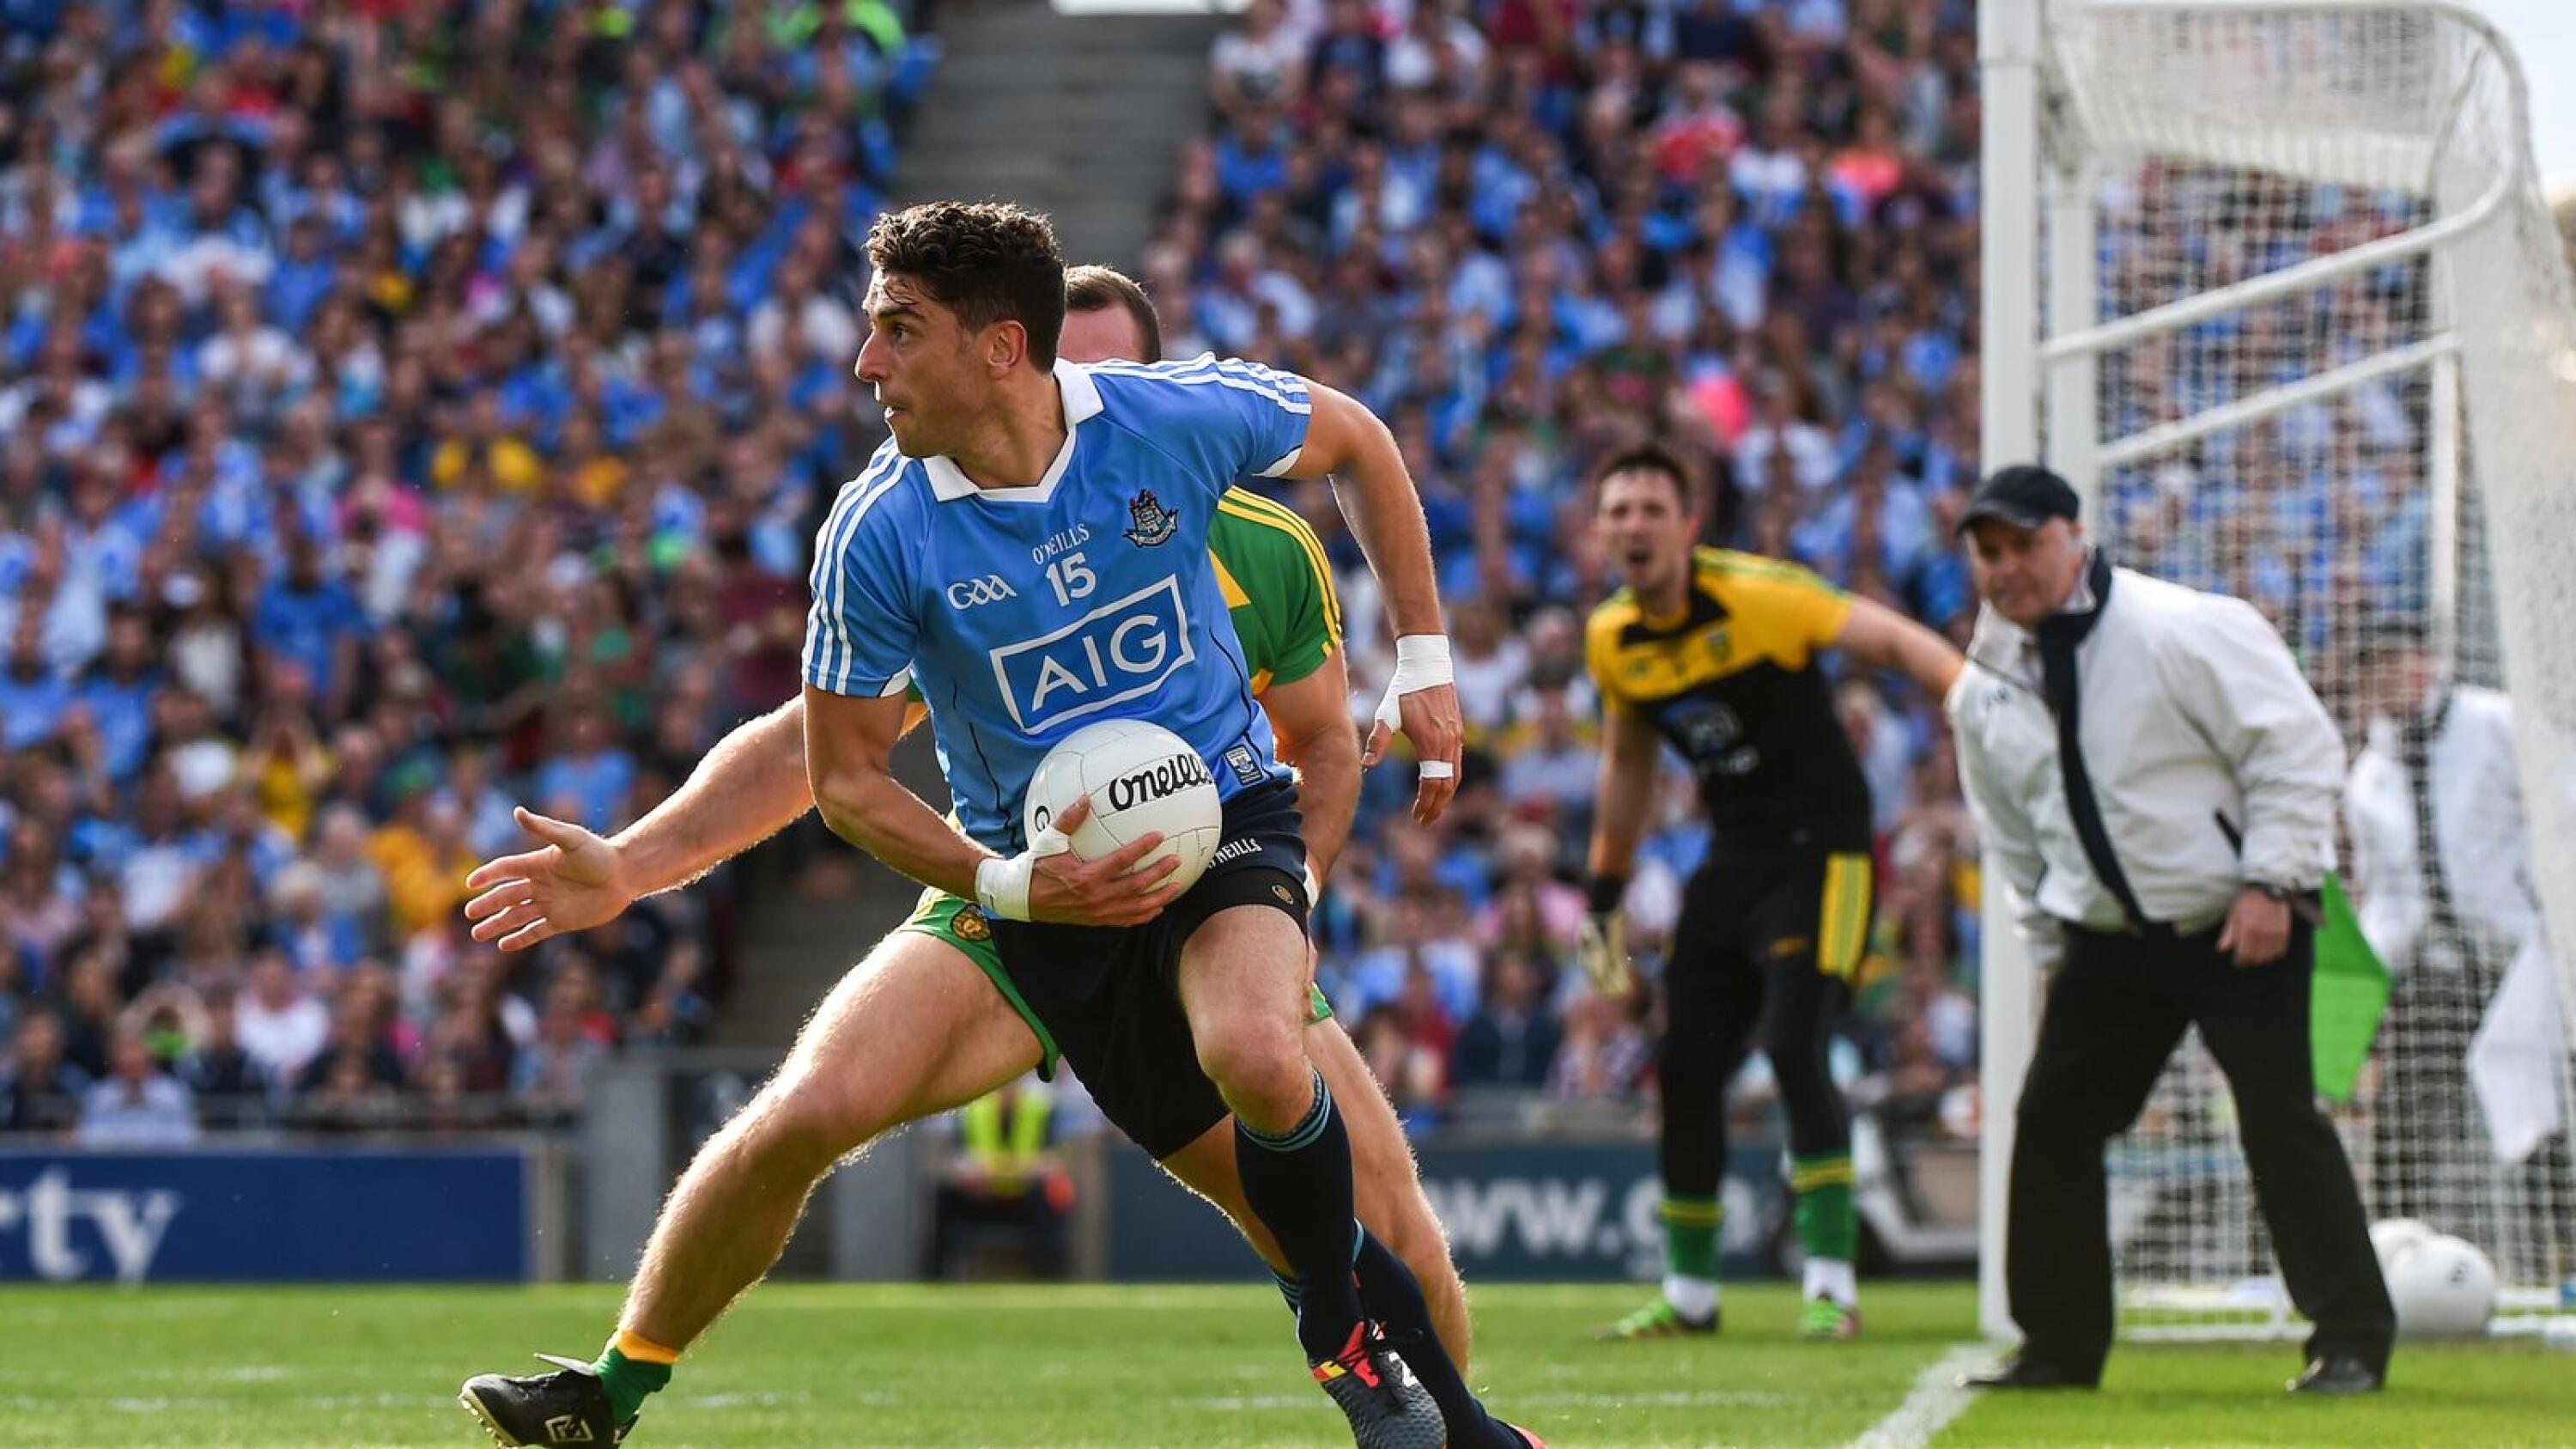 Ticketmaster Ireland offers incentives to GAA counties to boost ticket